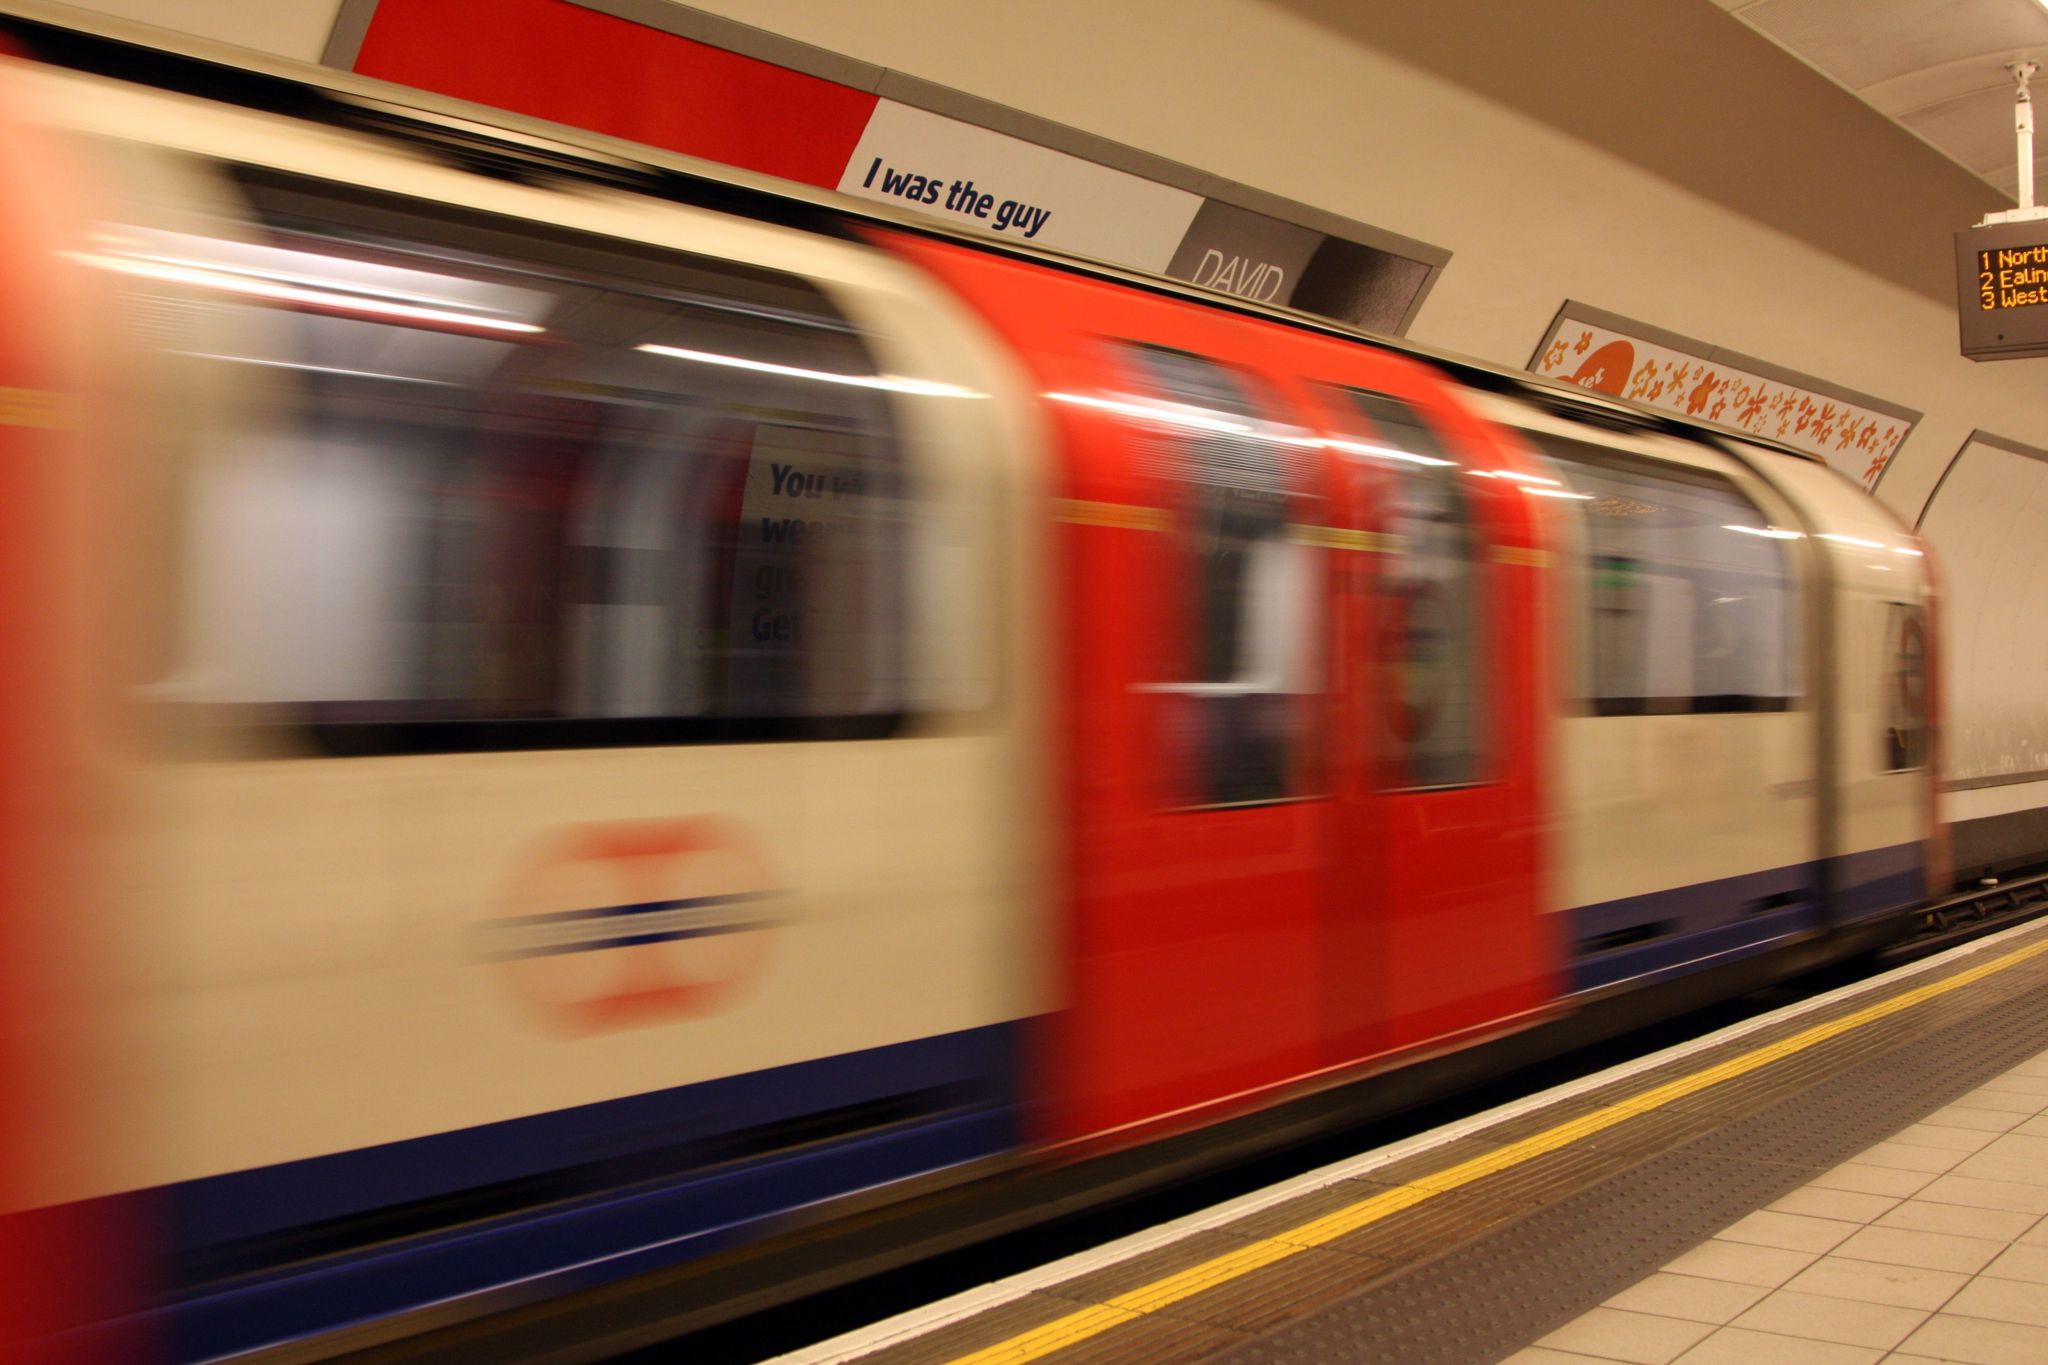 Central Line tube train pulling in next to platform at Shepherds Bush station in 2022